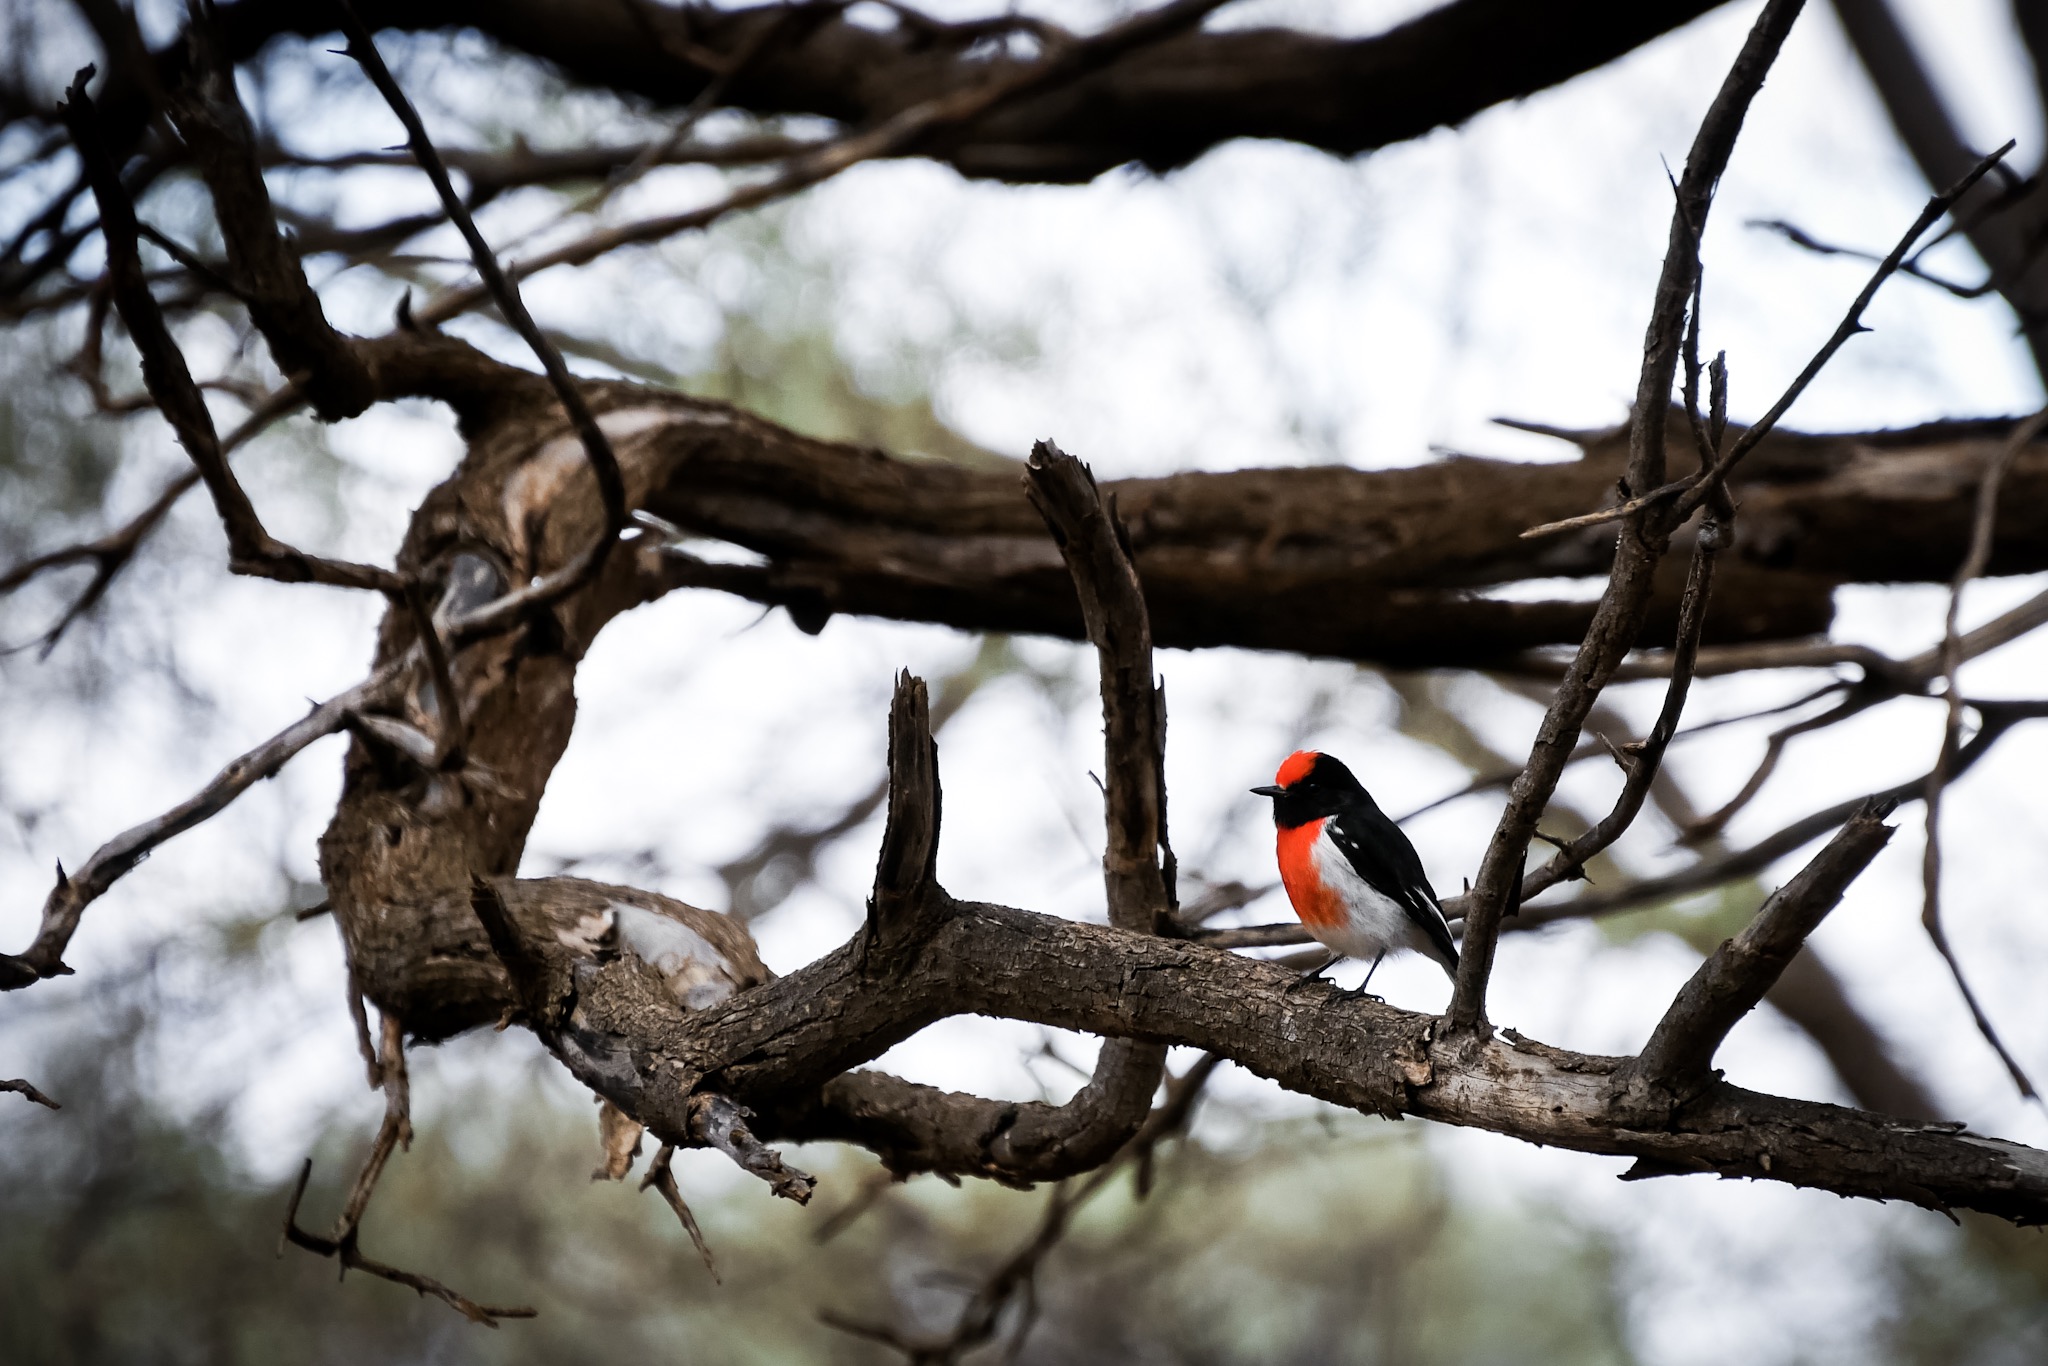 A Red-capped robin in the Australian Outback © Claire Blumenfeld